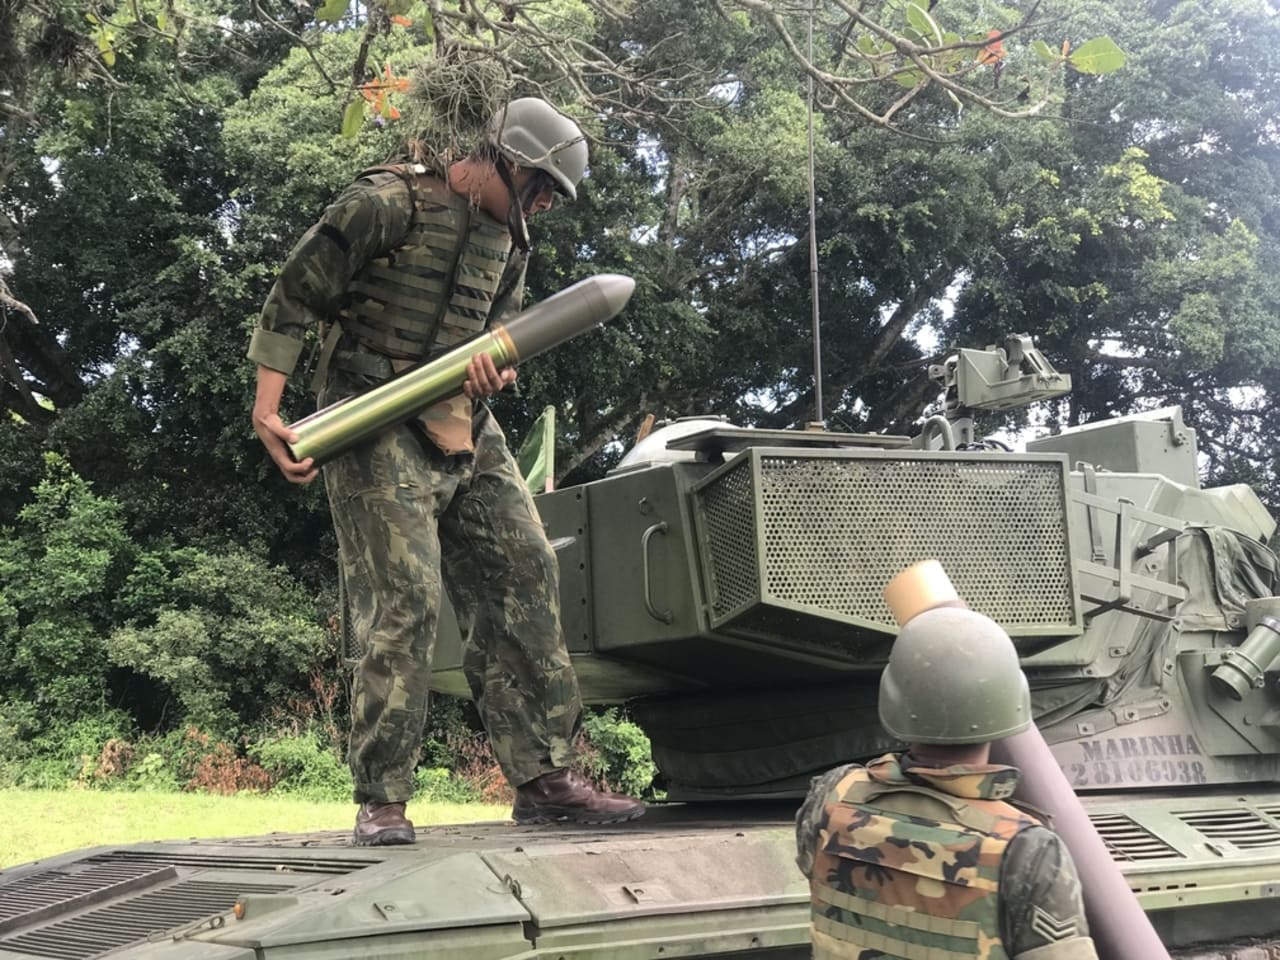 Brazilian Army Evaluation Center supports training exercise for Brazilian Marine Corps battalions